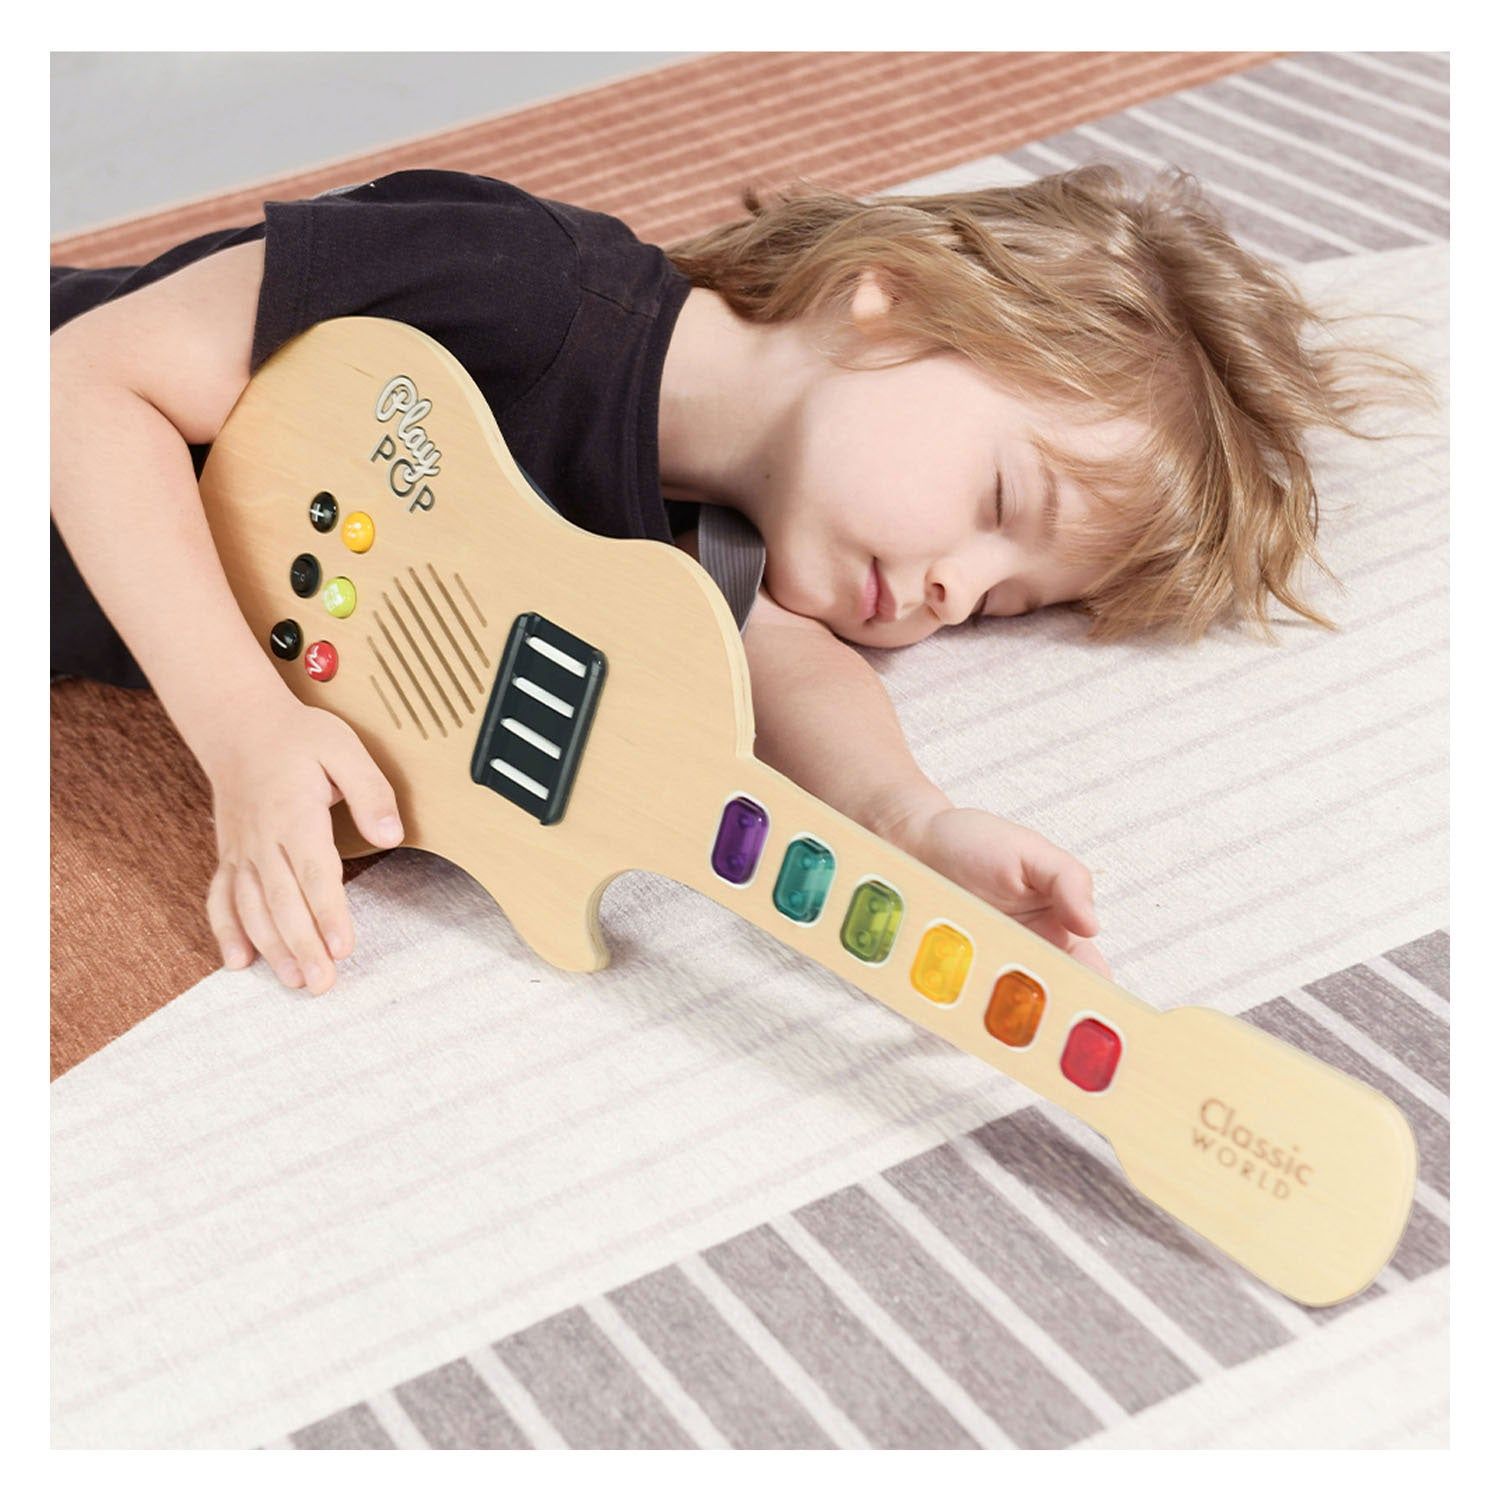 Glowing electric guitar for children - MoonyBoon